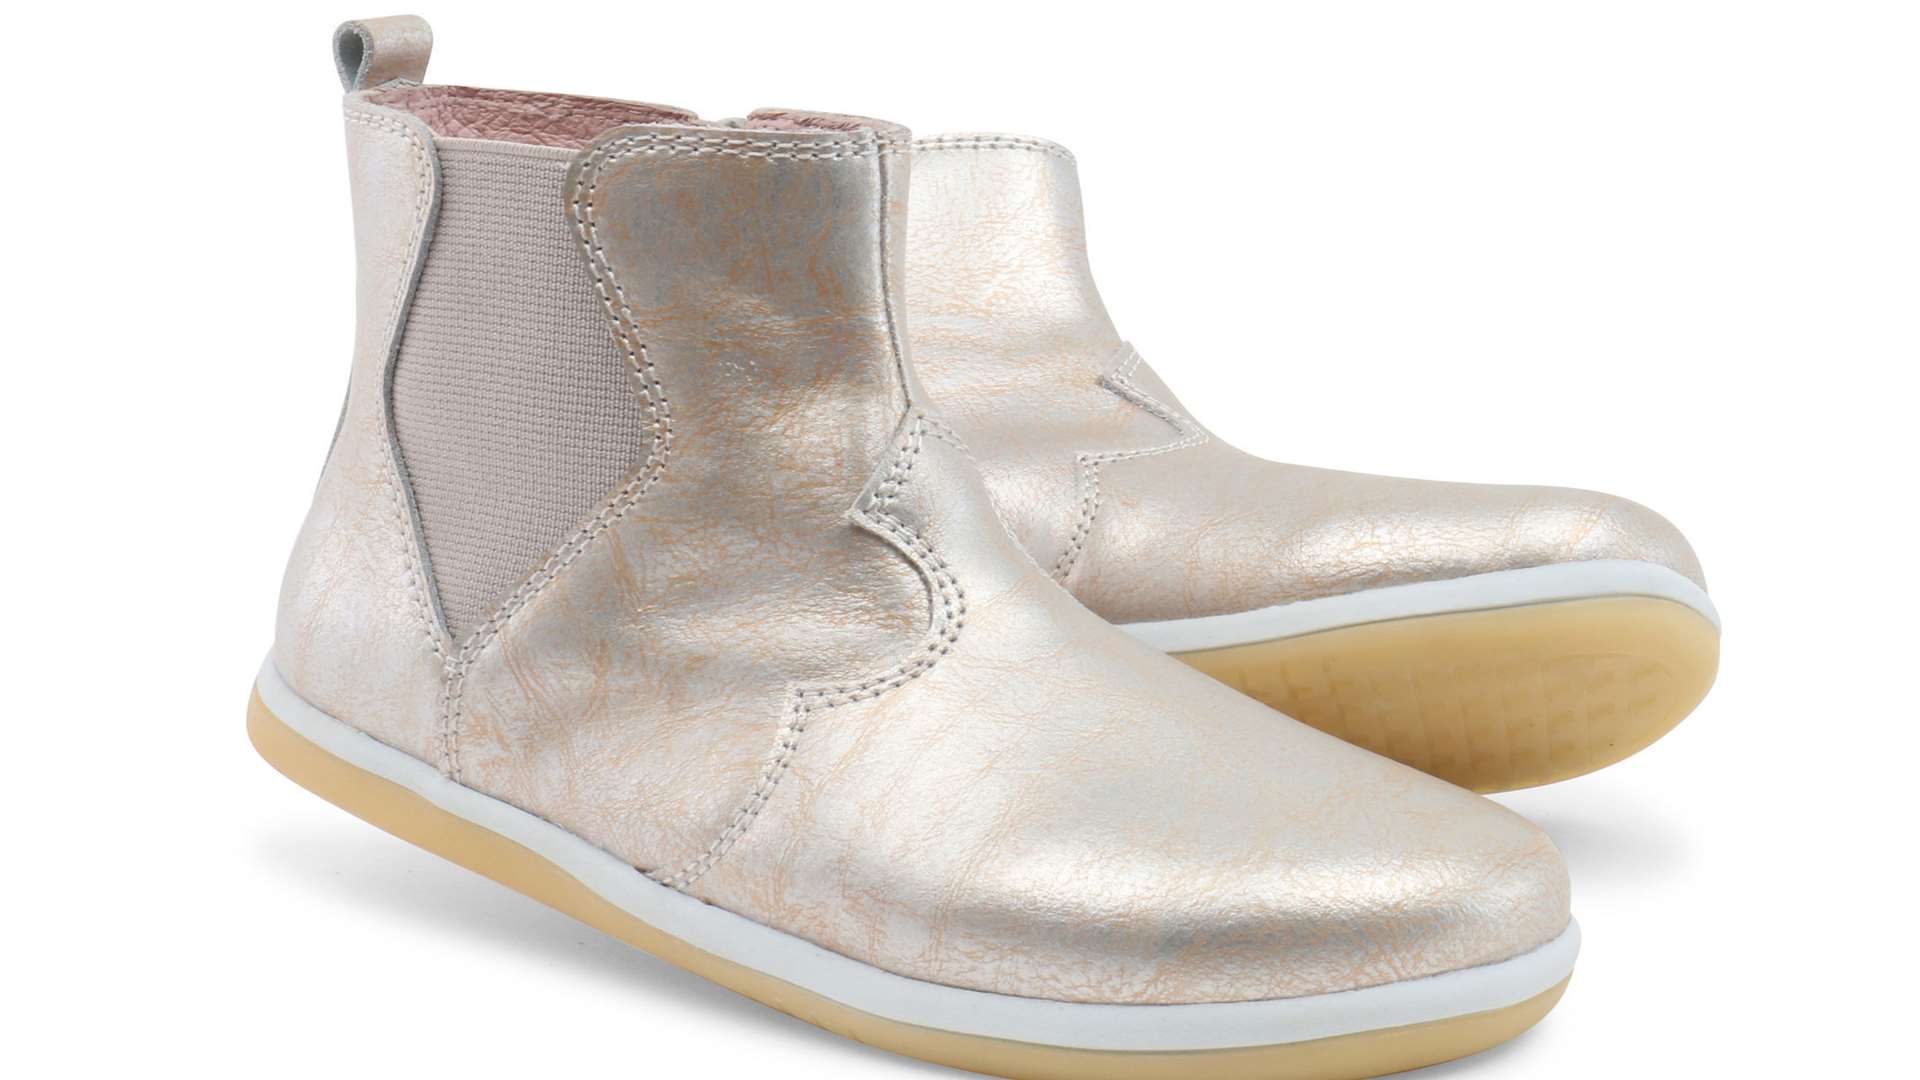 These molten boots by Bobux are perfect for winter days